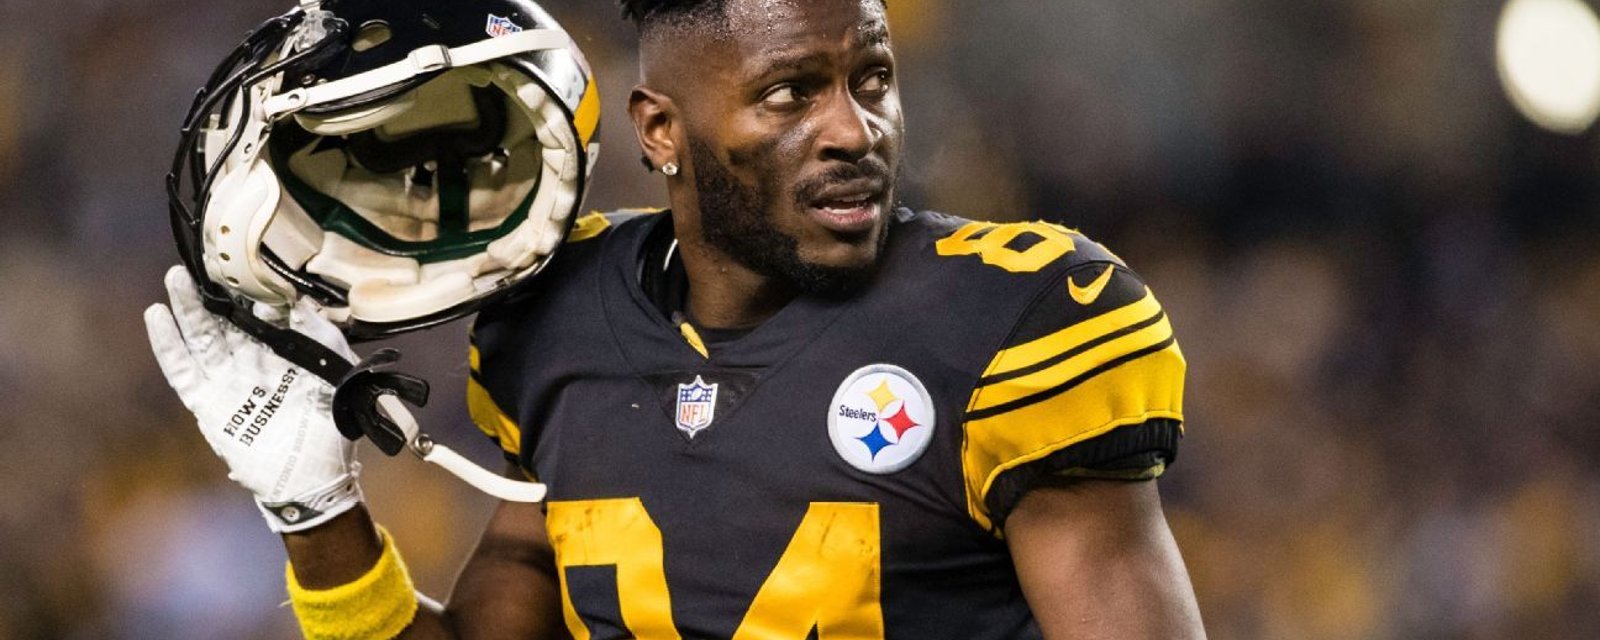 Antonio Brown forces NFL into making rule change 